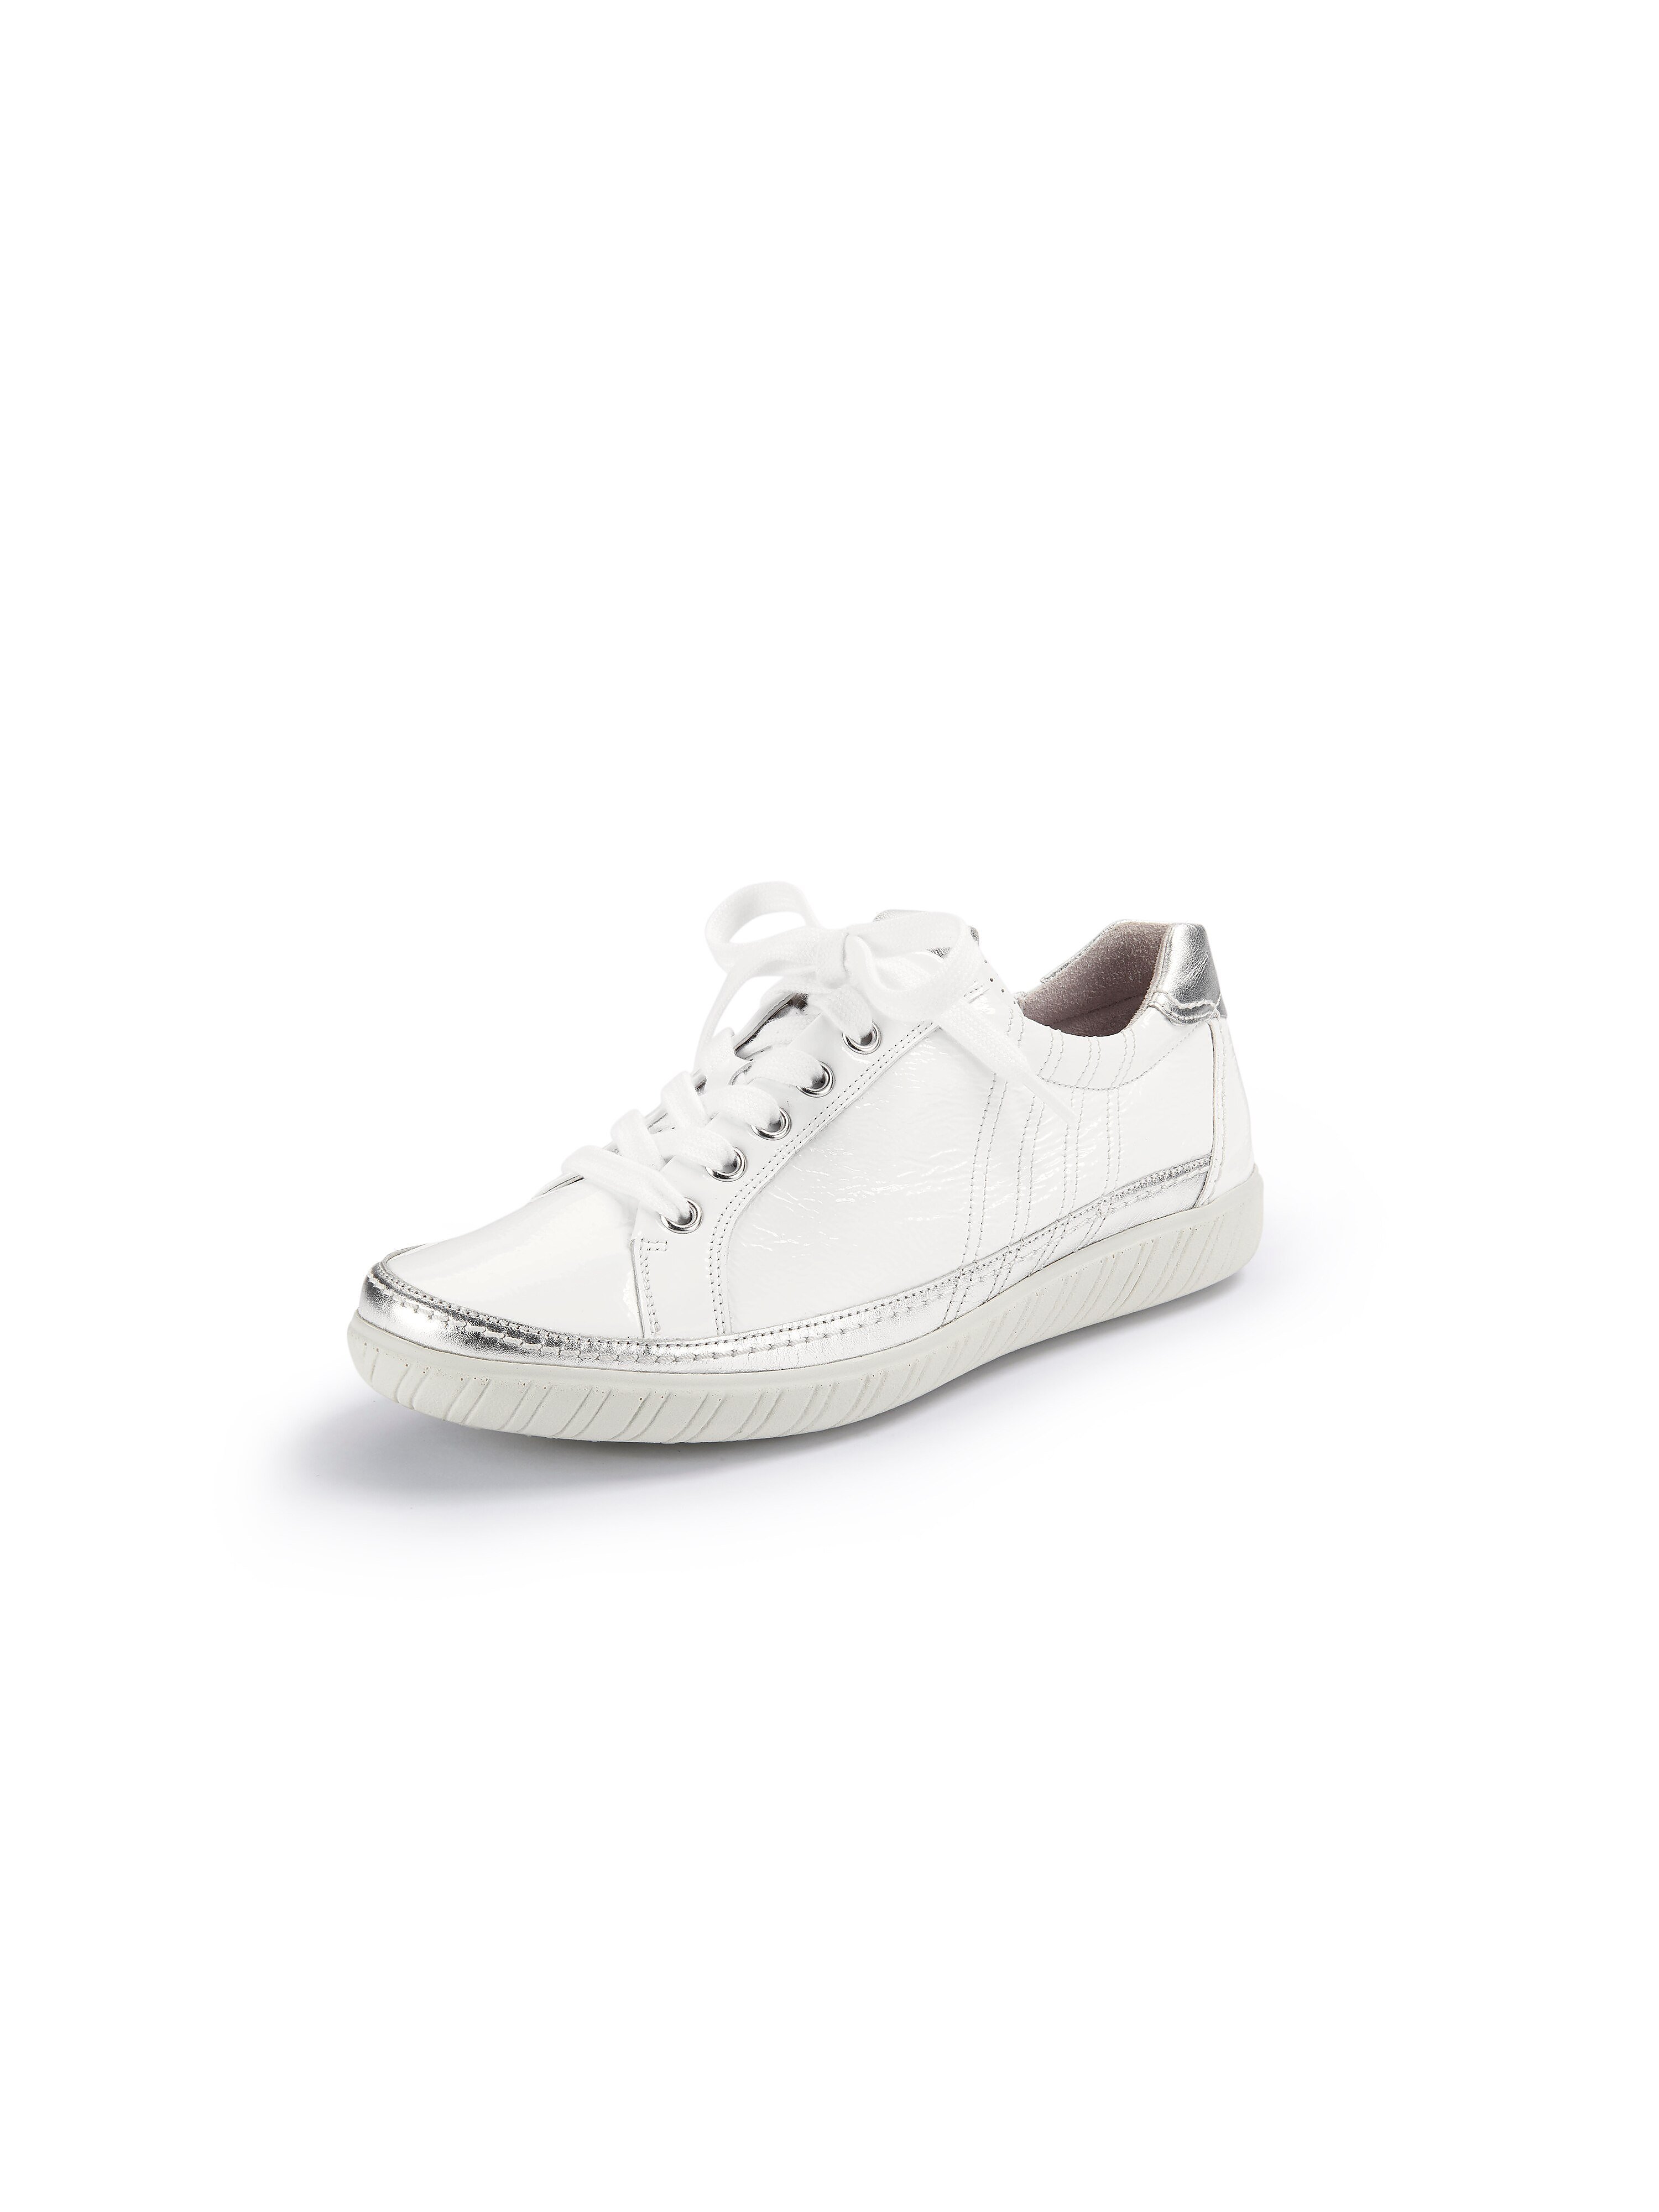 Sneakers nappa leather details Gabor Comfort white